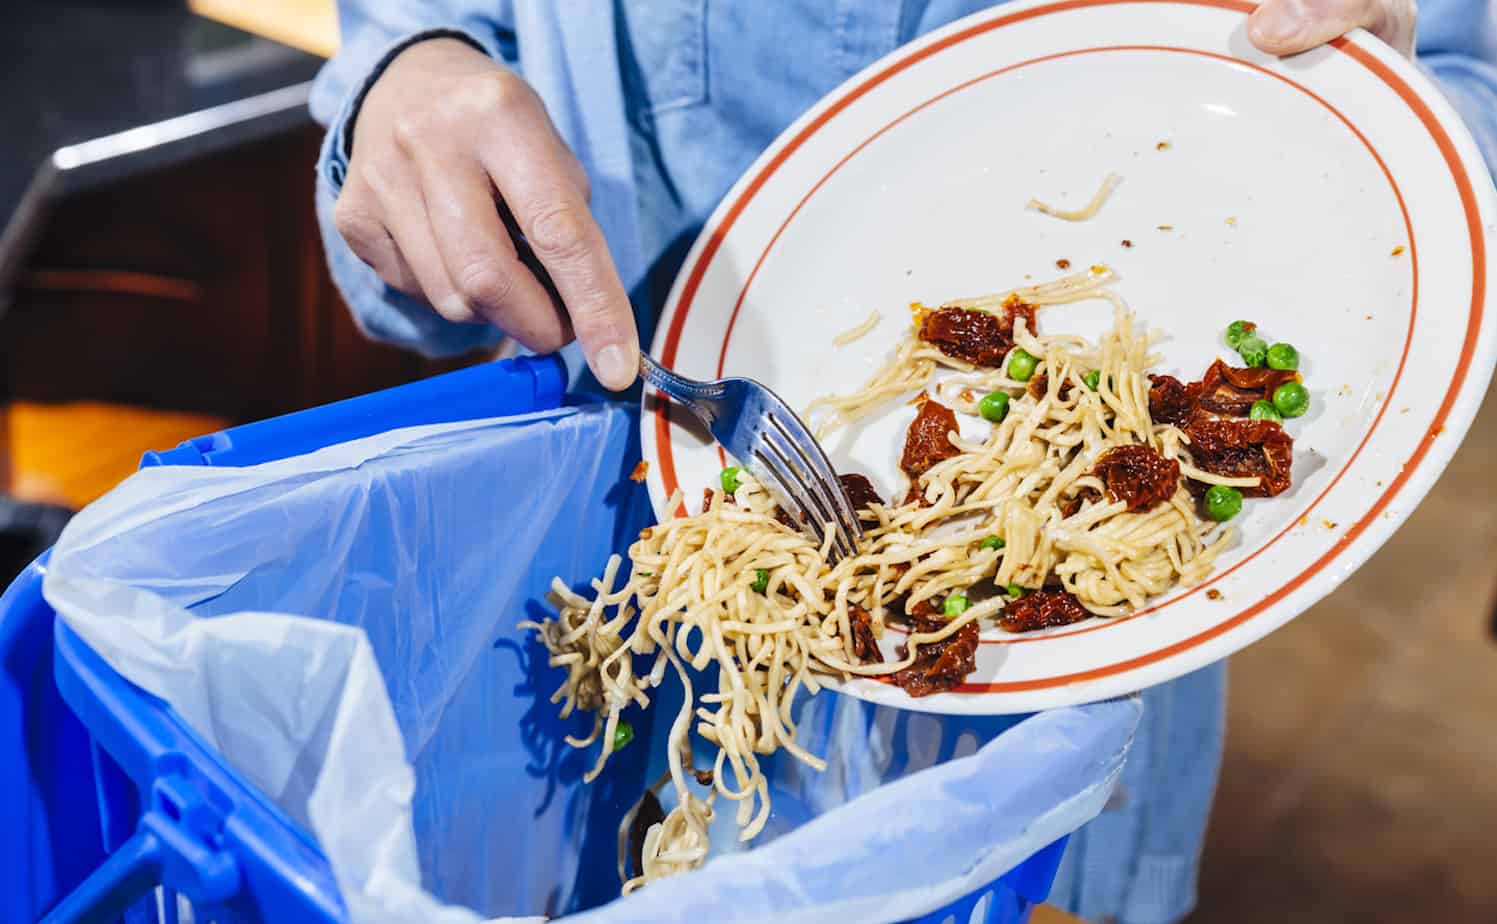 A new booklet from the Consumer Foods Forum highlights successful approaches to measuring and reducing food waste from companies around the world.